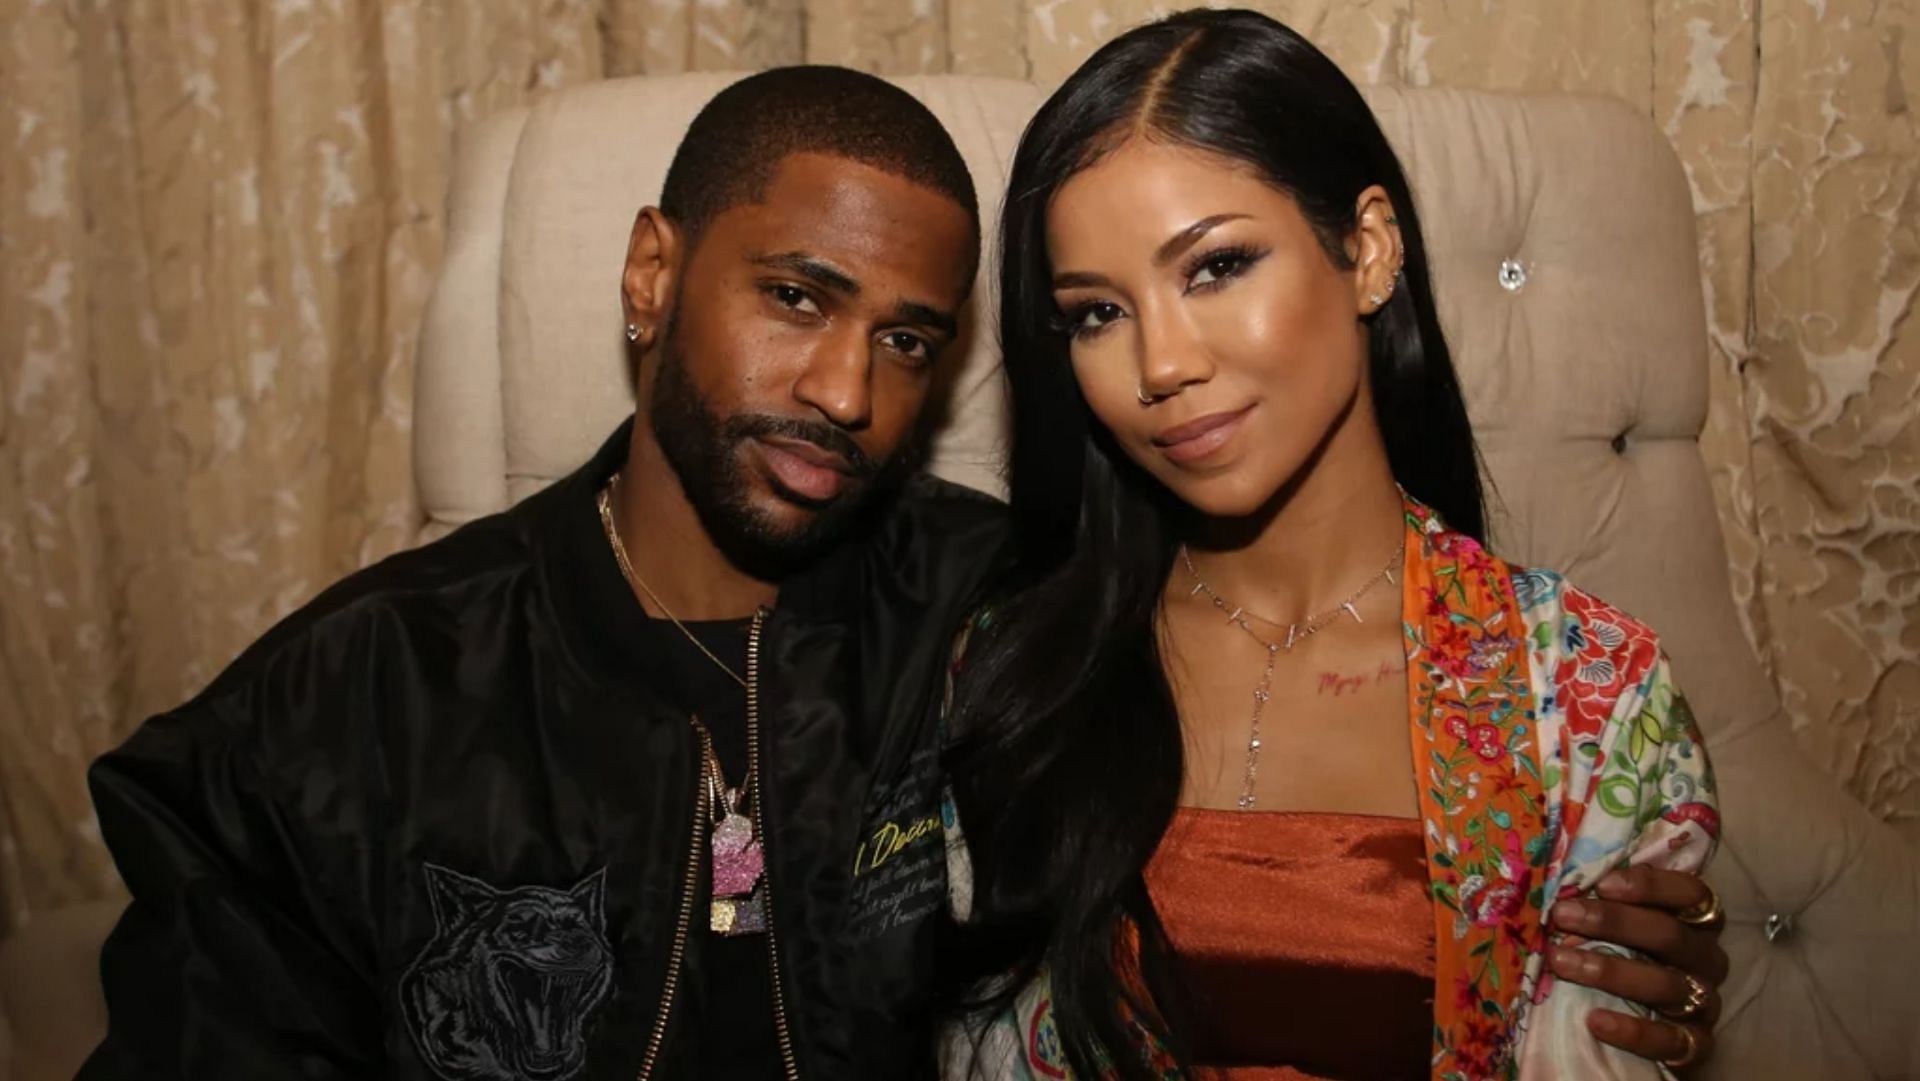 Big Sean and Jhene Aiko officially started dating in 2016. (Image via Thaddaeus McAdams/Getty)